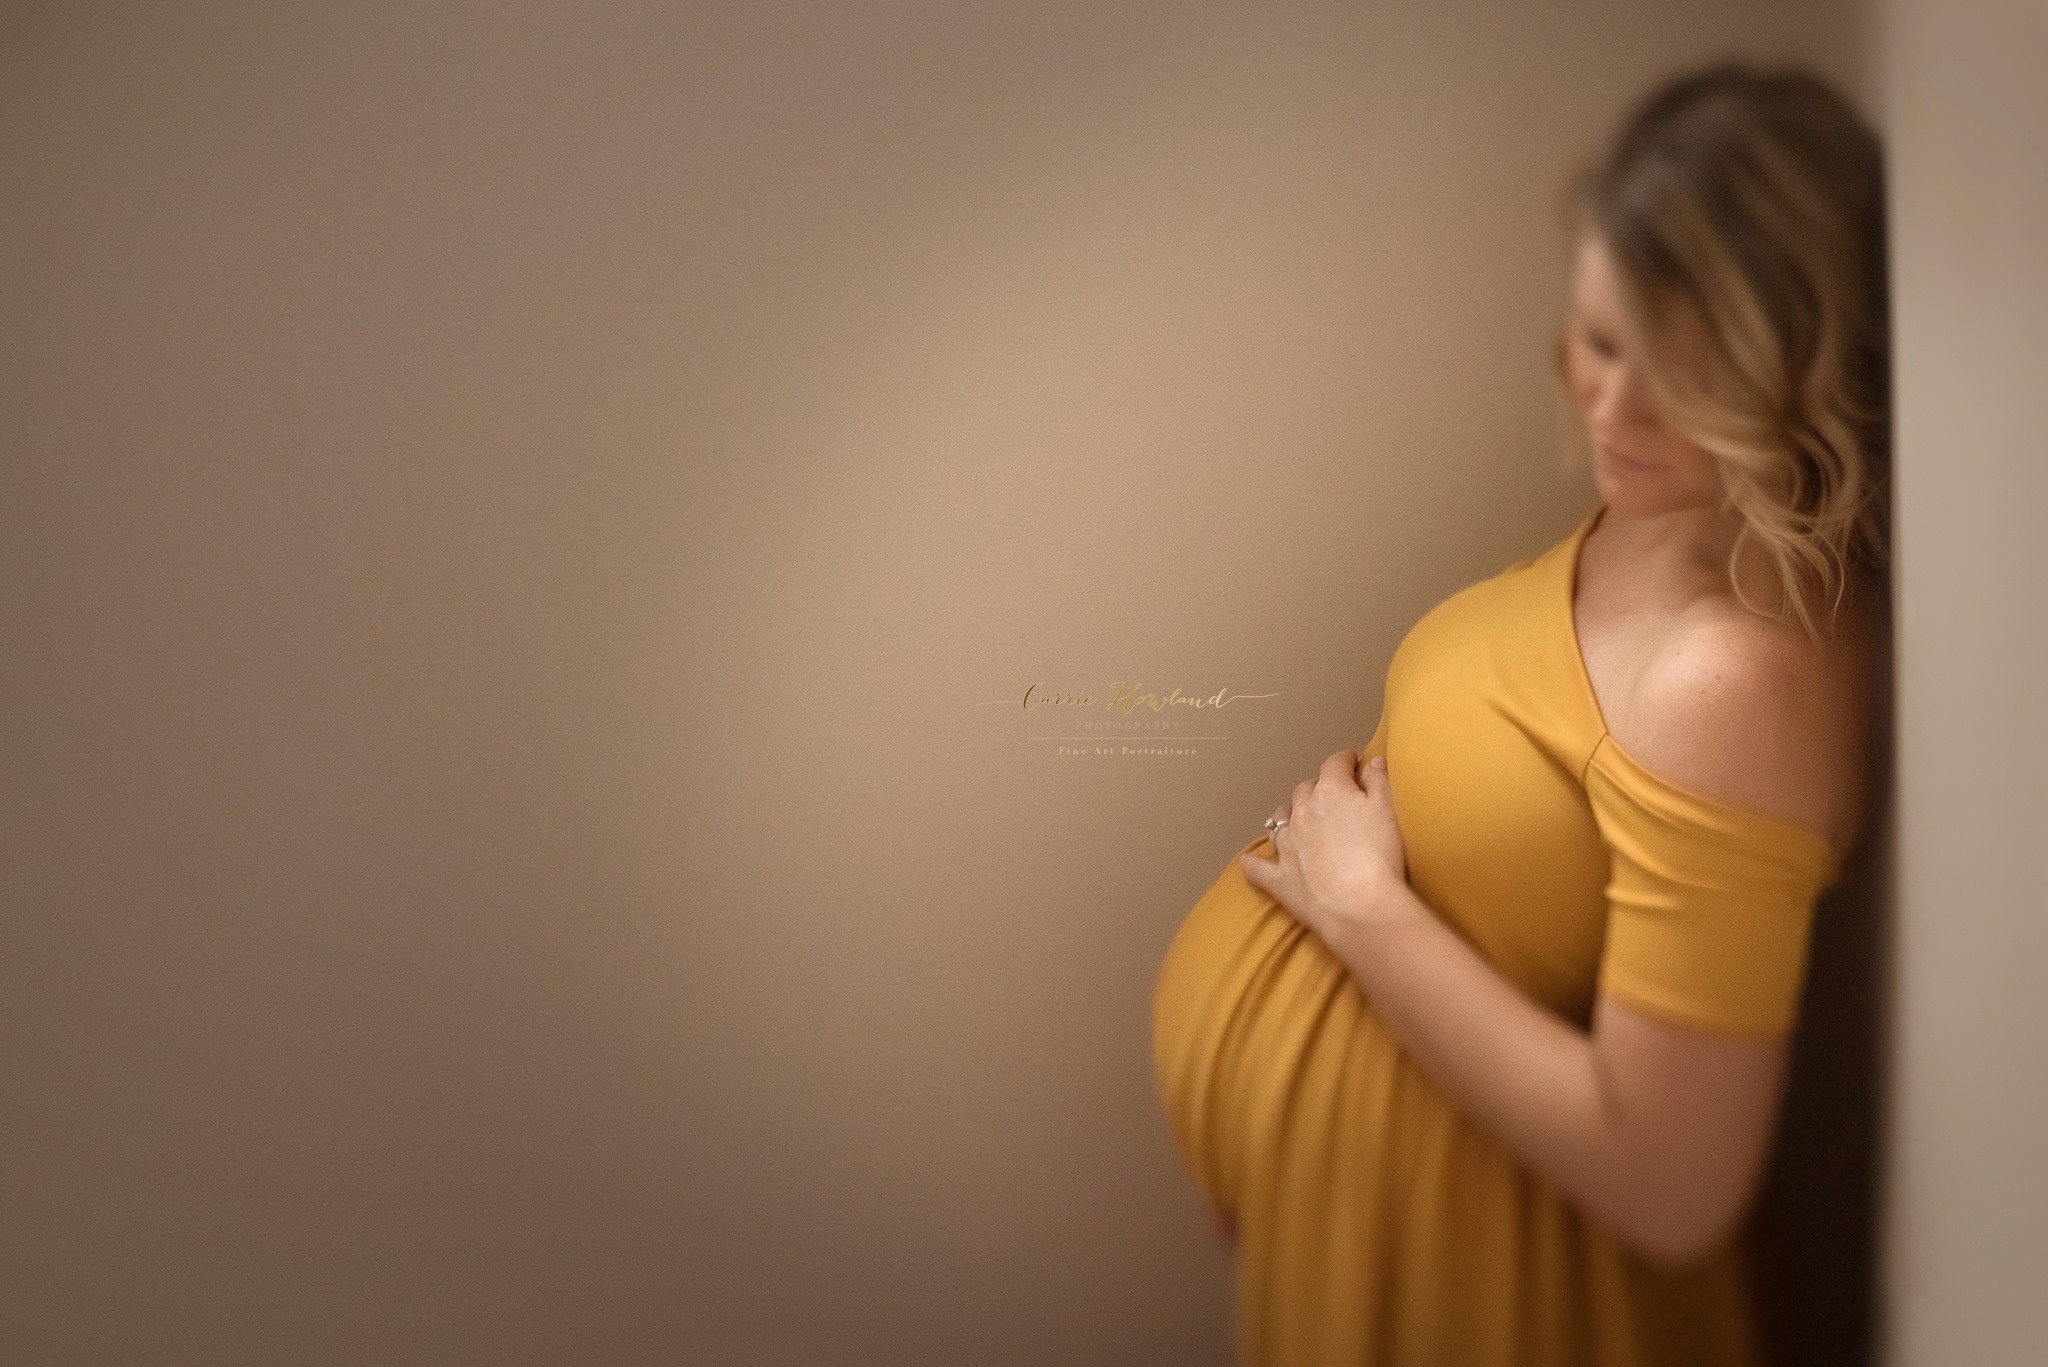 freelens maternity pictures, daily fan favorite